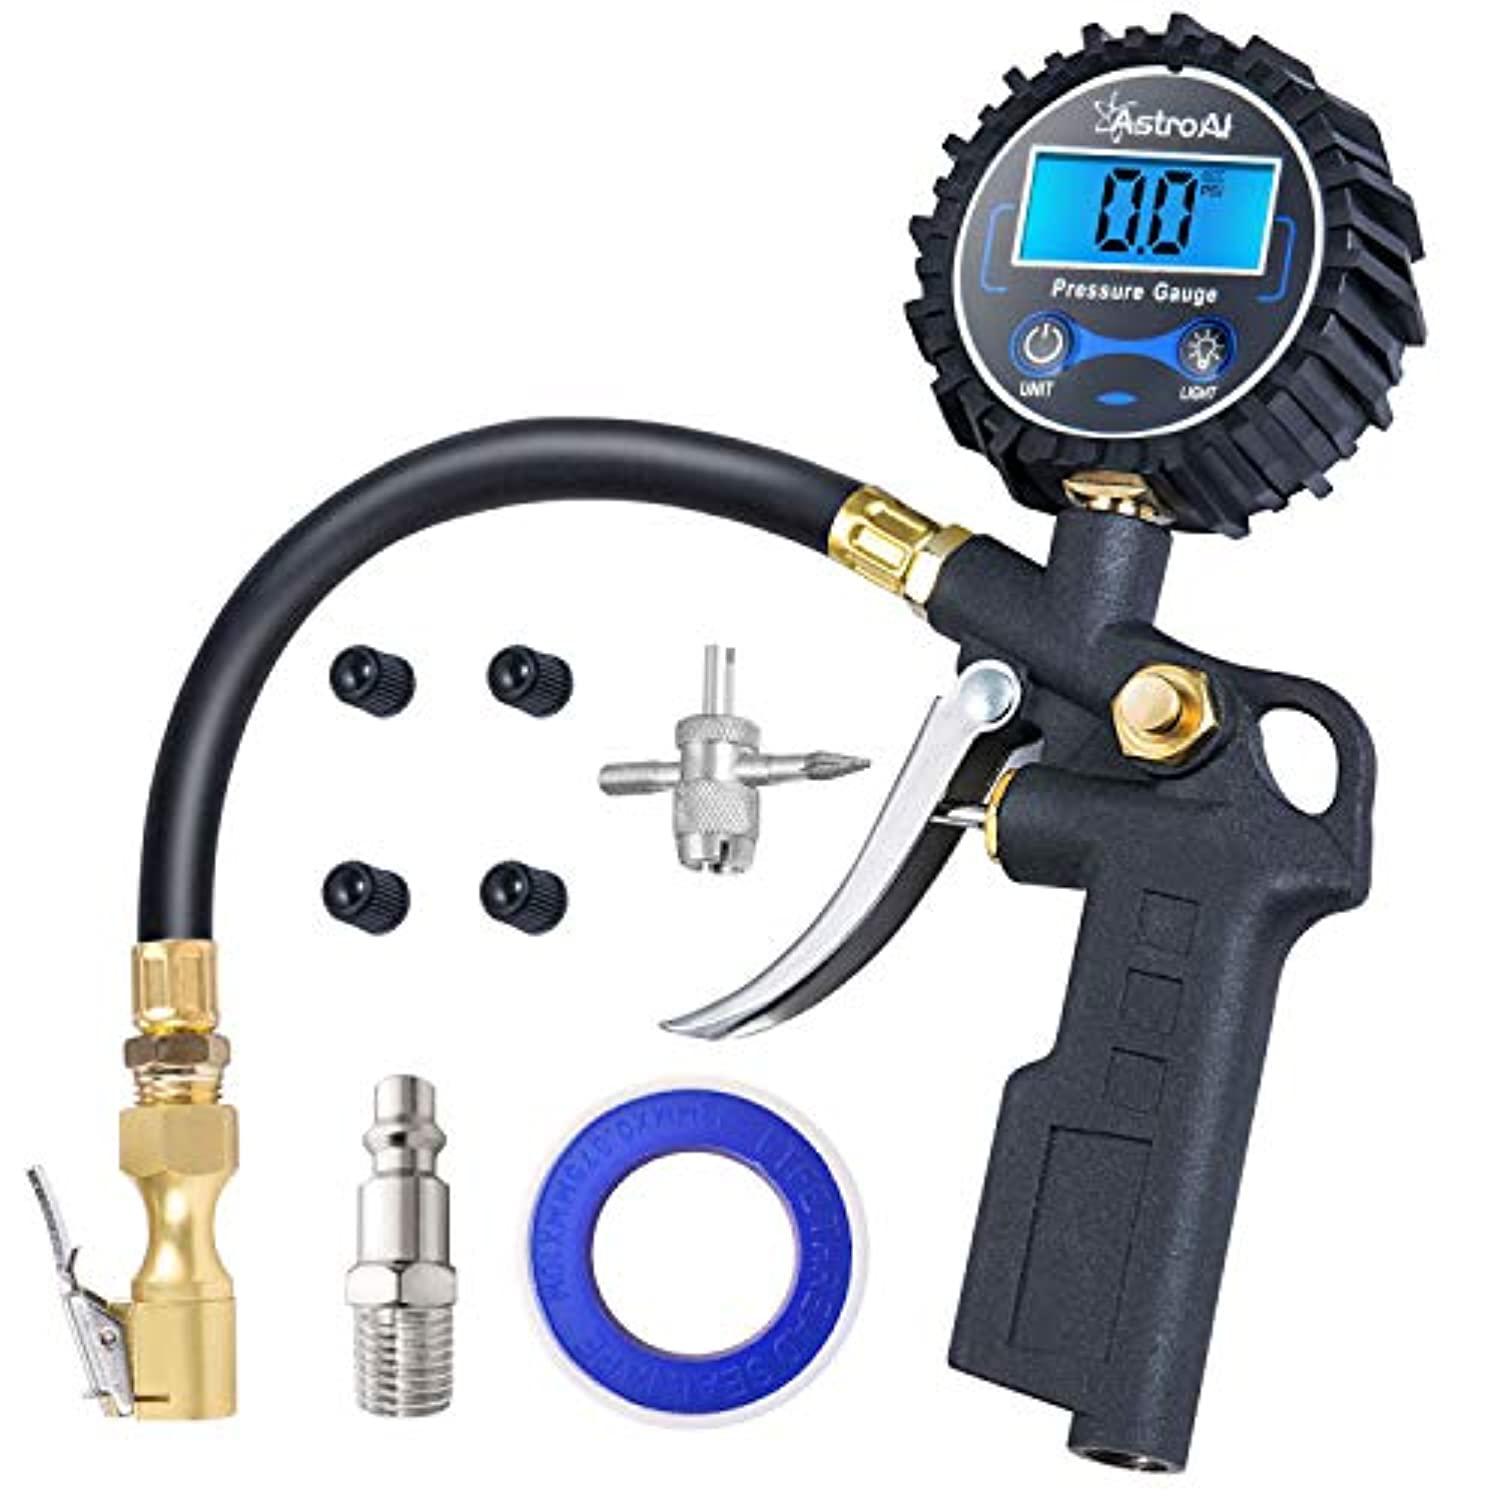 AstroAI astroai digital tire inflator with pressure gauge, 250 psi air  chuck and compressor accessories heavy duty with rubber hose a